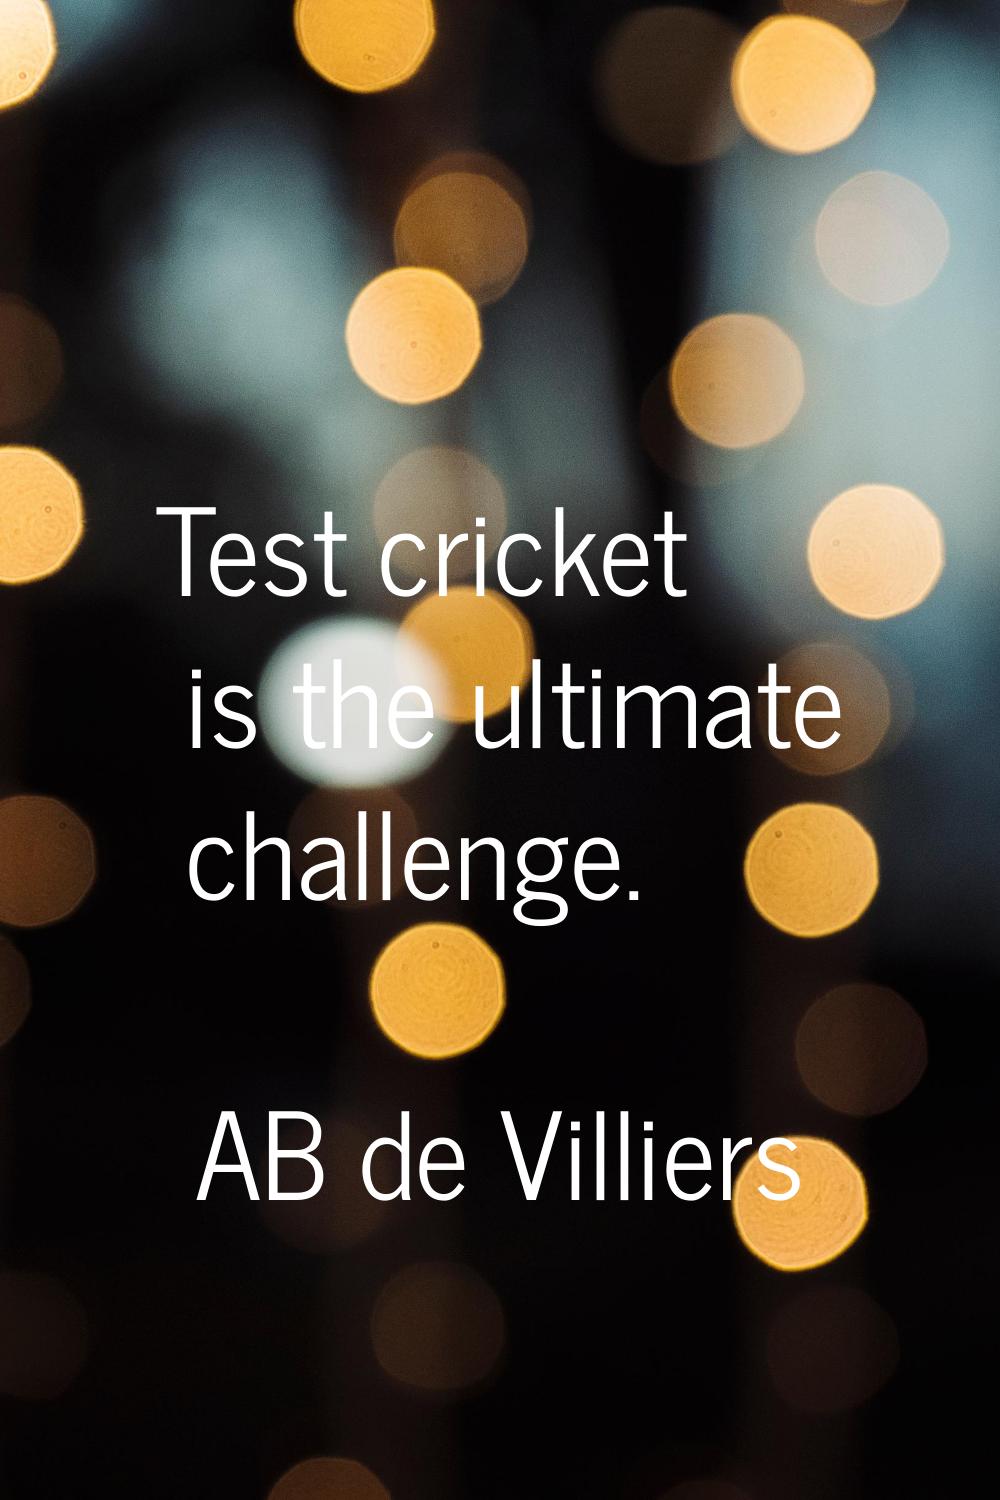 Test cricket is the ultimate challenge.